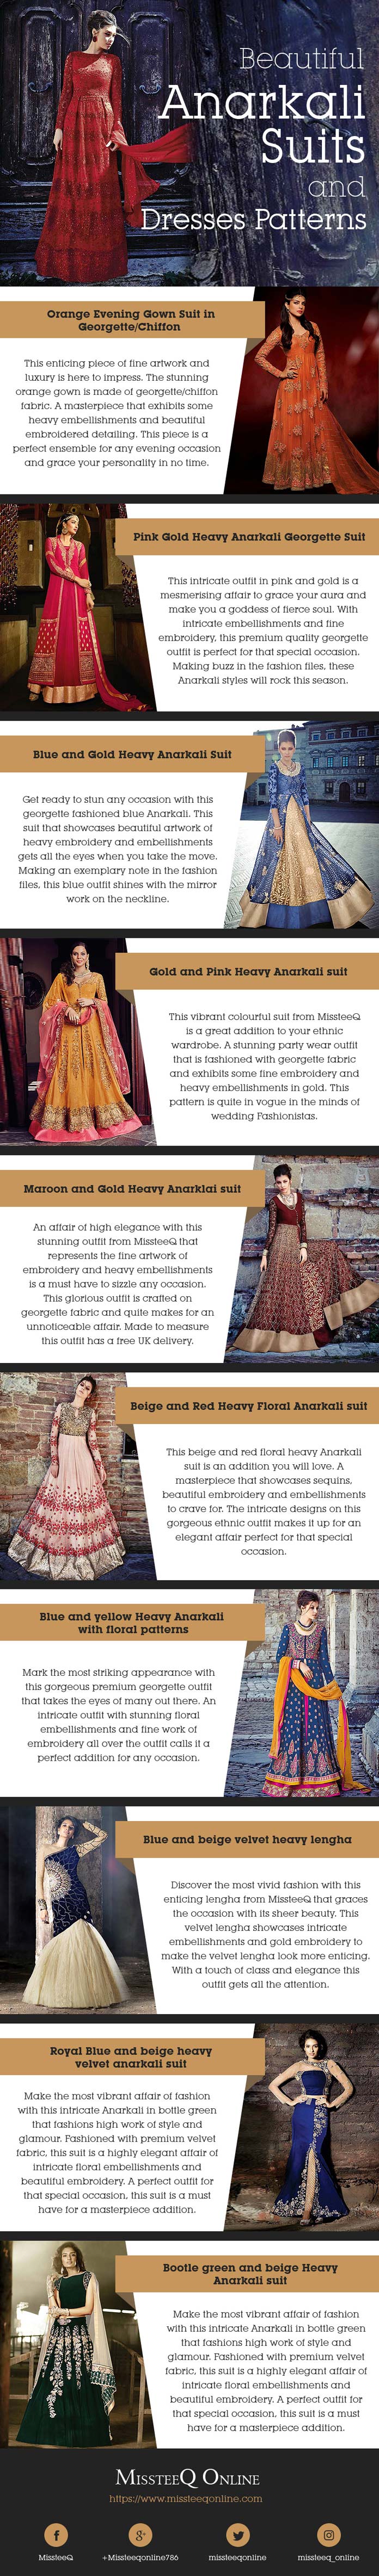 Beautiful Anarkali Suits and Dresses Patterns [Infographic]